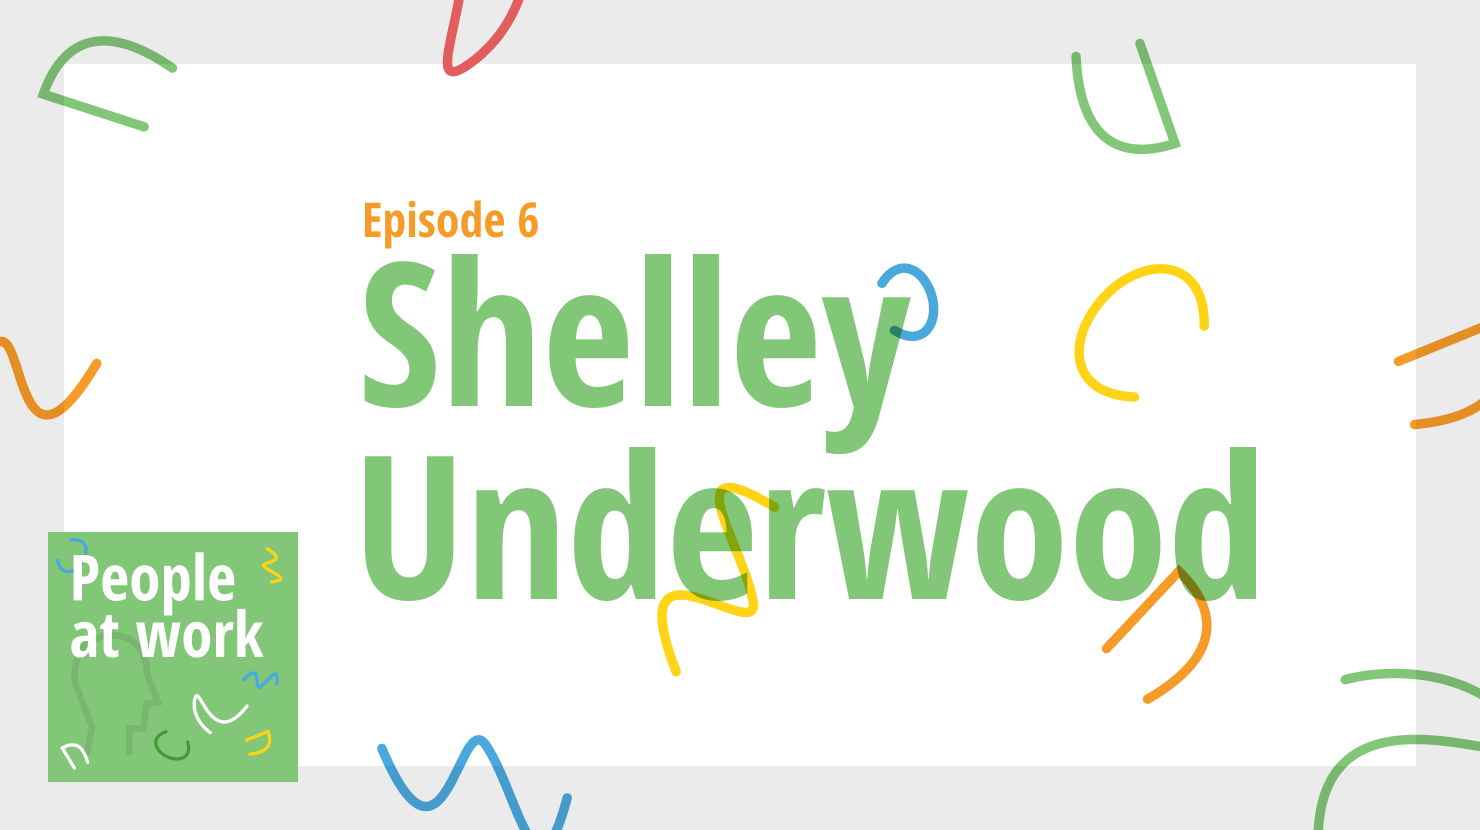 People at Work, Episode 6: Shelley Underwood on impacting others for good